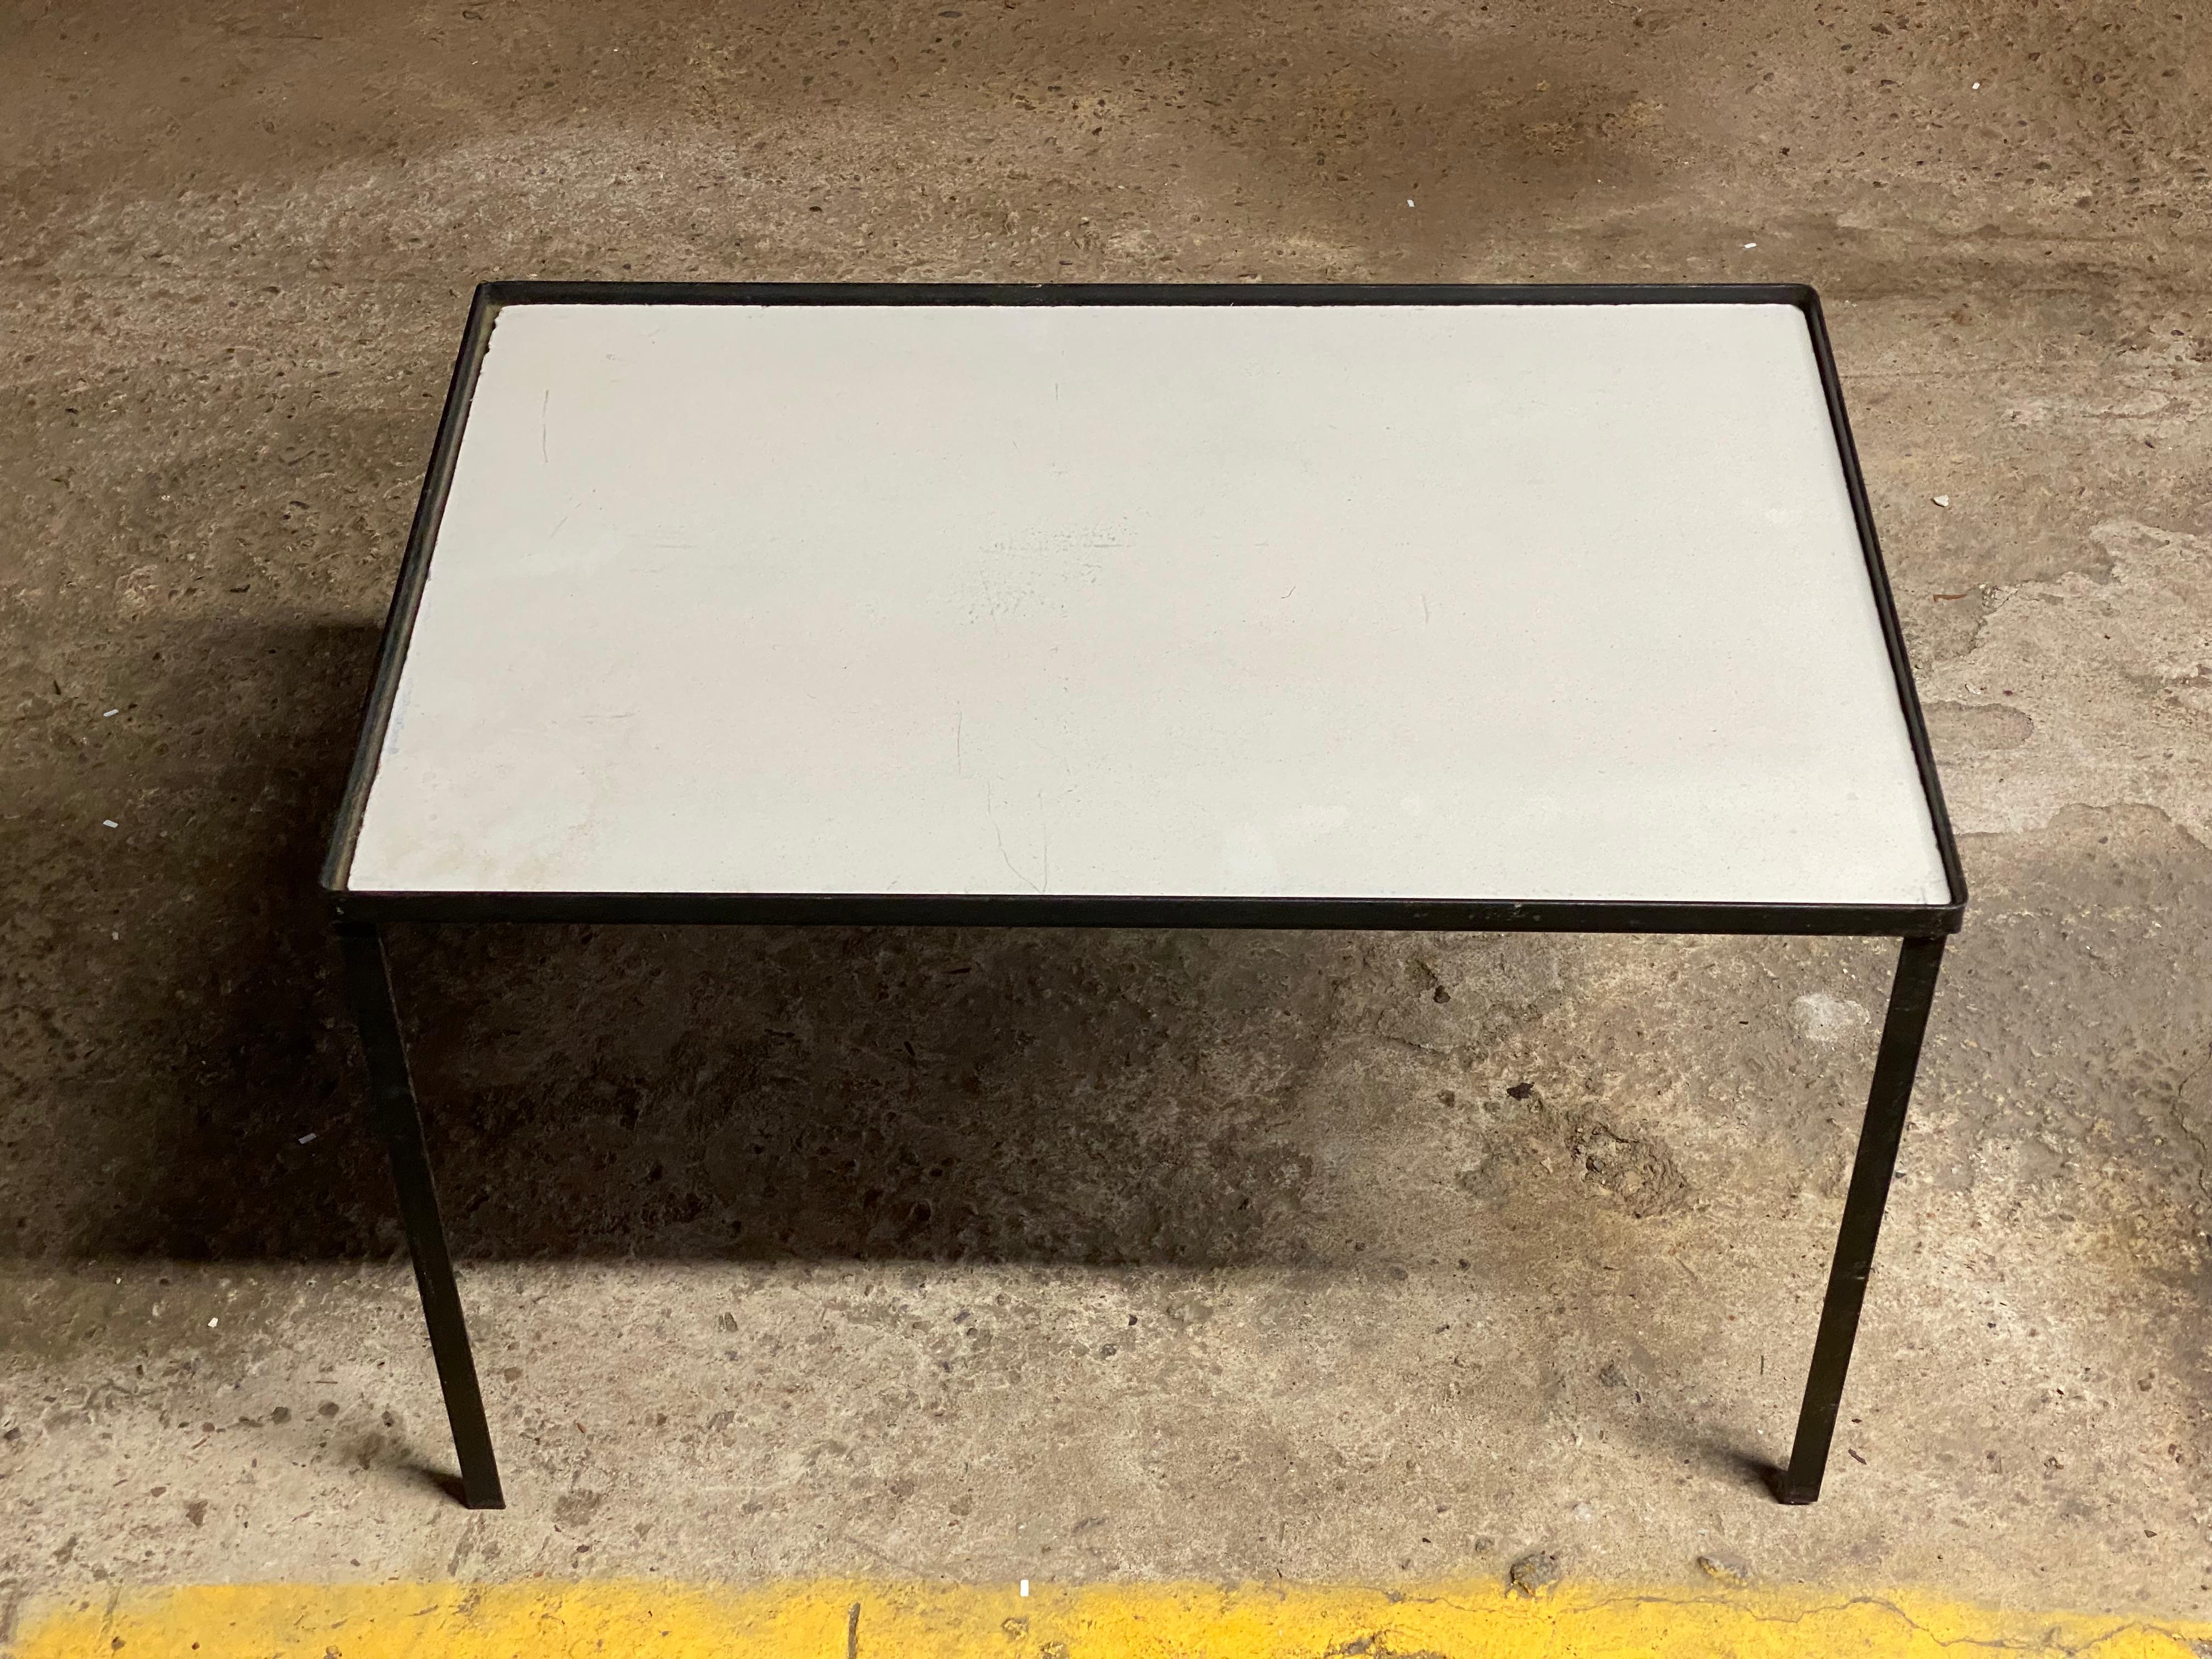 1950s Frederic Weinberg Iron End Table or Stacking Shelf In Good Condition For Sale In Garnerville, NY